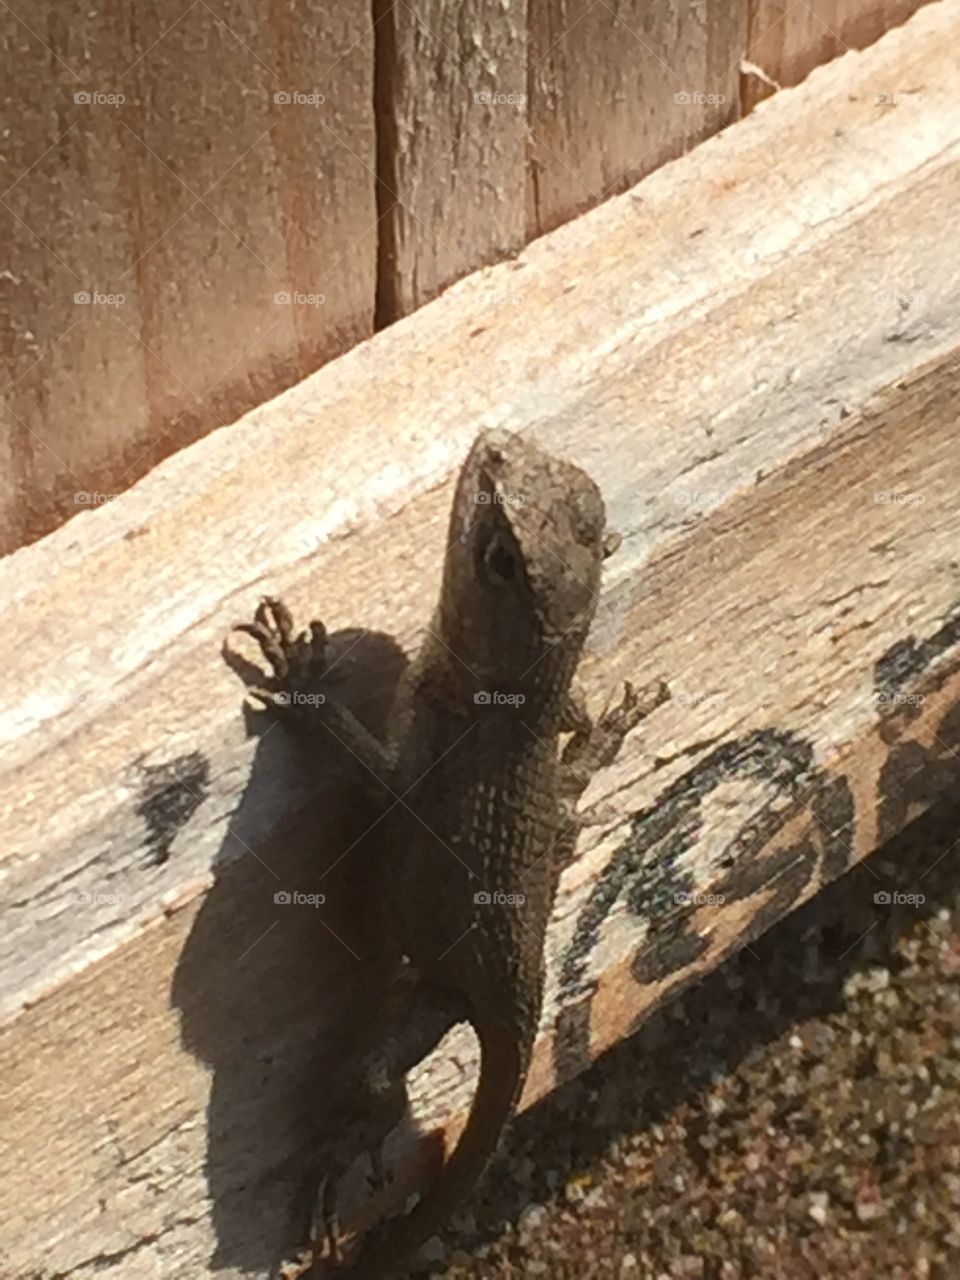 A baby blue belly lizard from the backyard saying Hi!